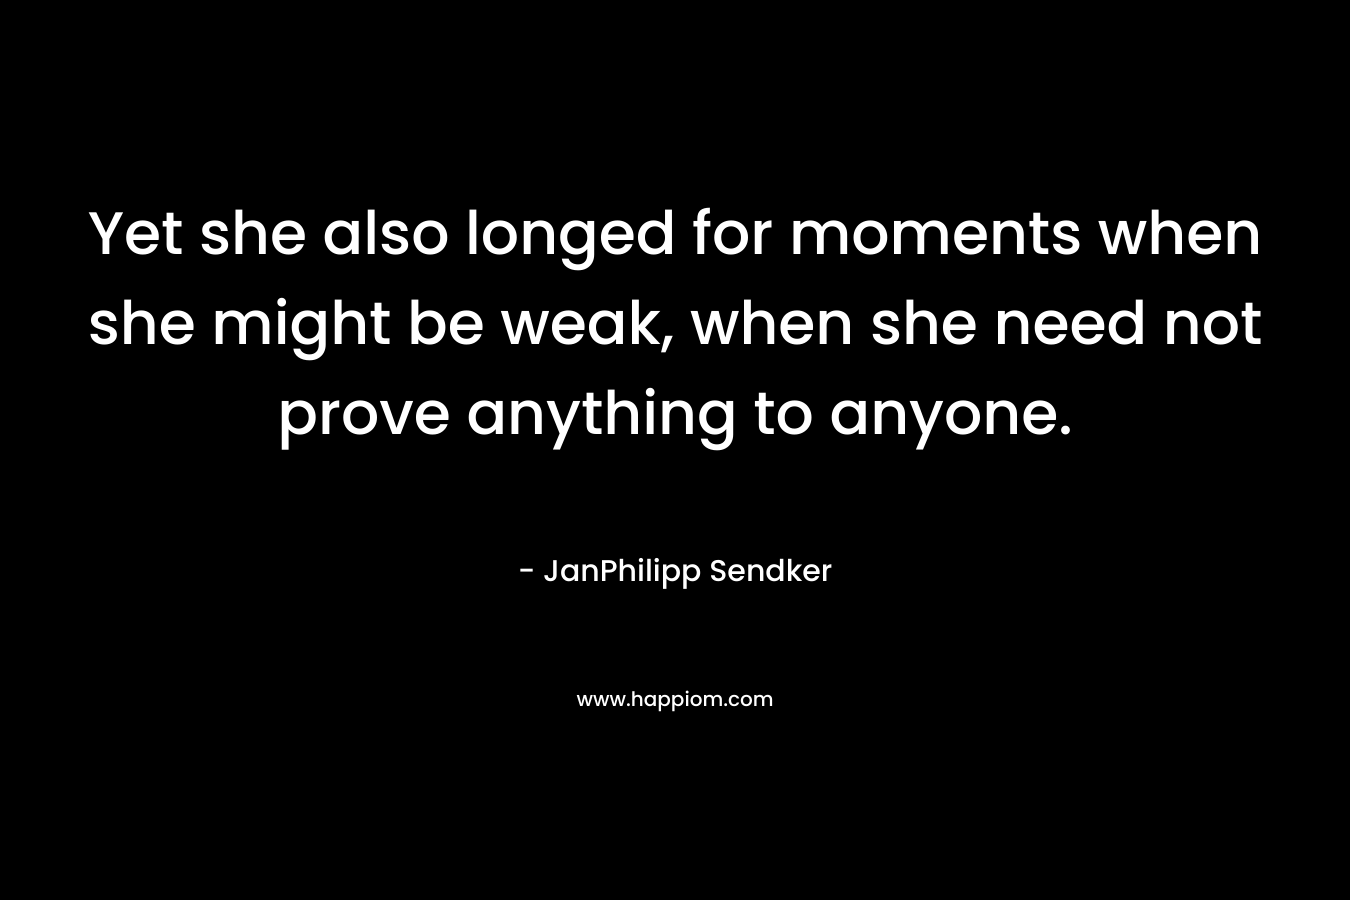 Yet she also longed for moments when she might be weak, when she need not prove anything to anyone. – JanPhilipp Sendker